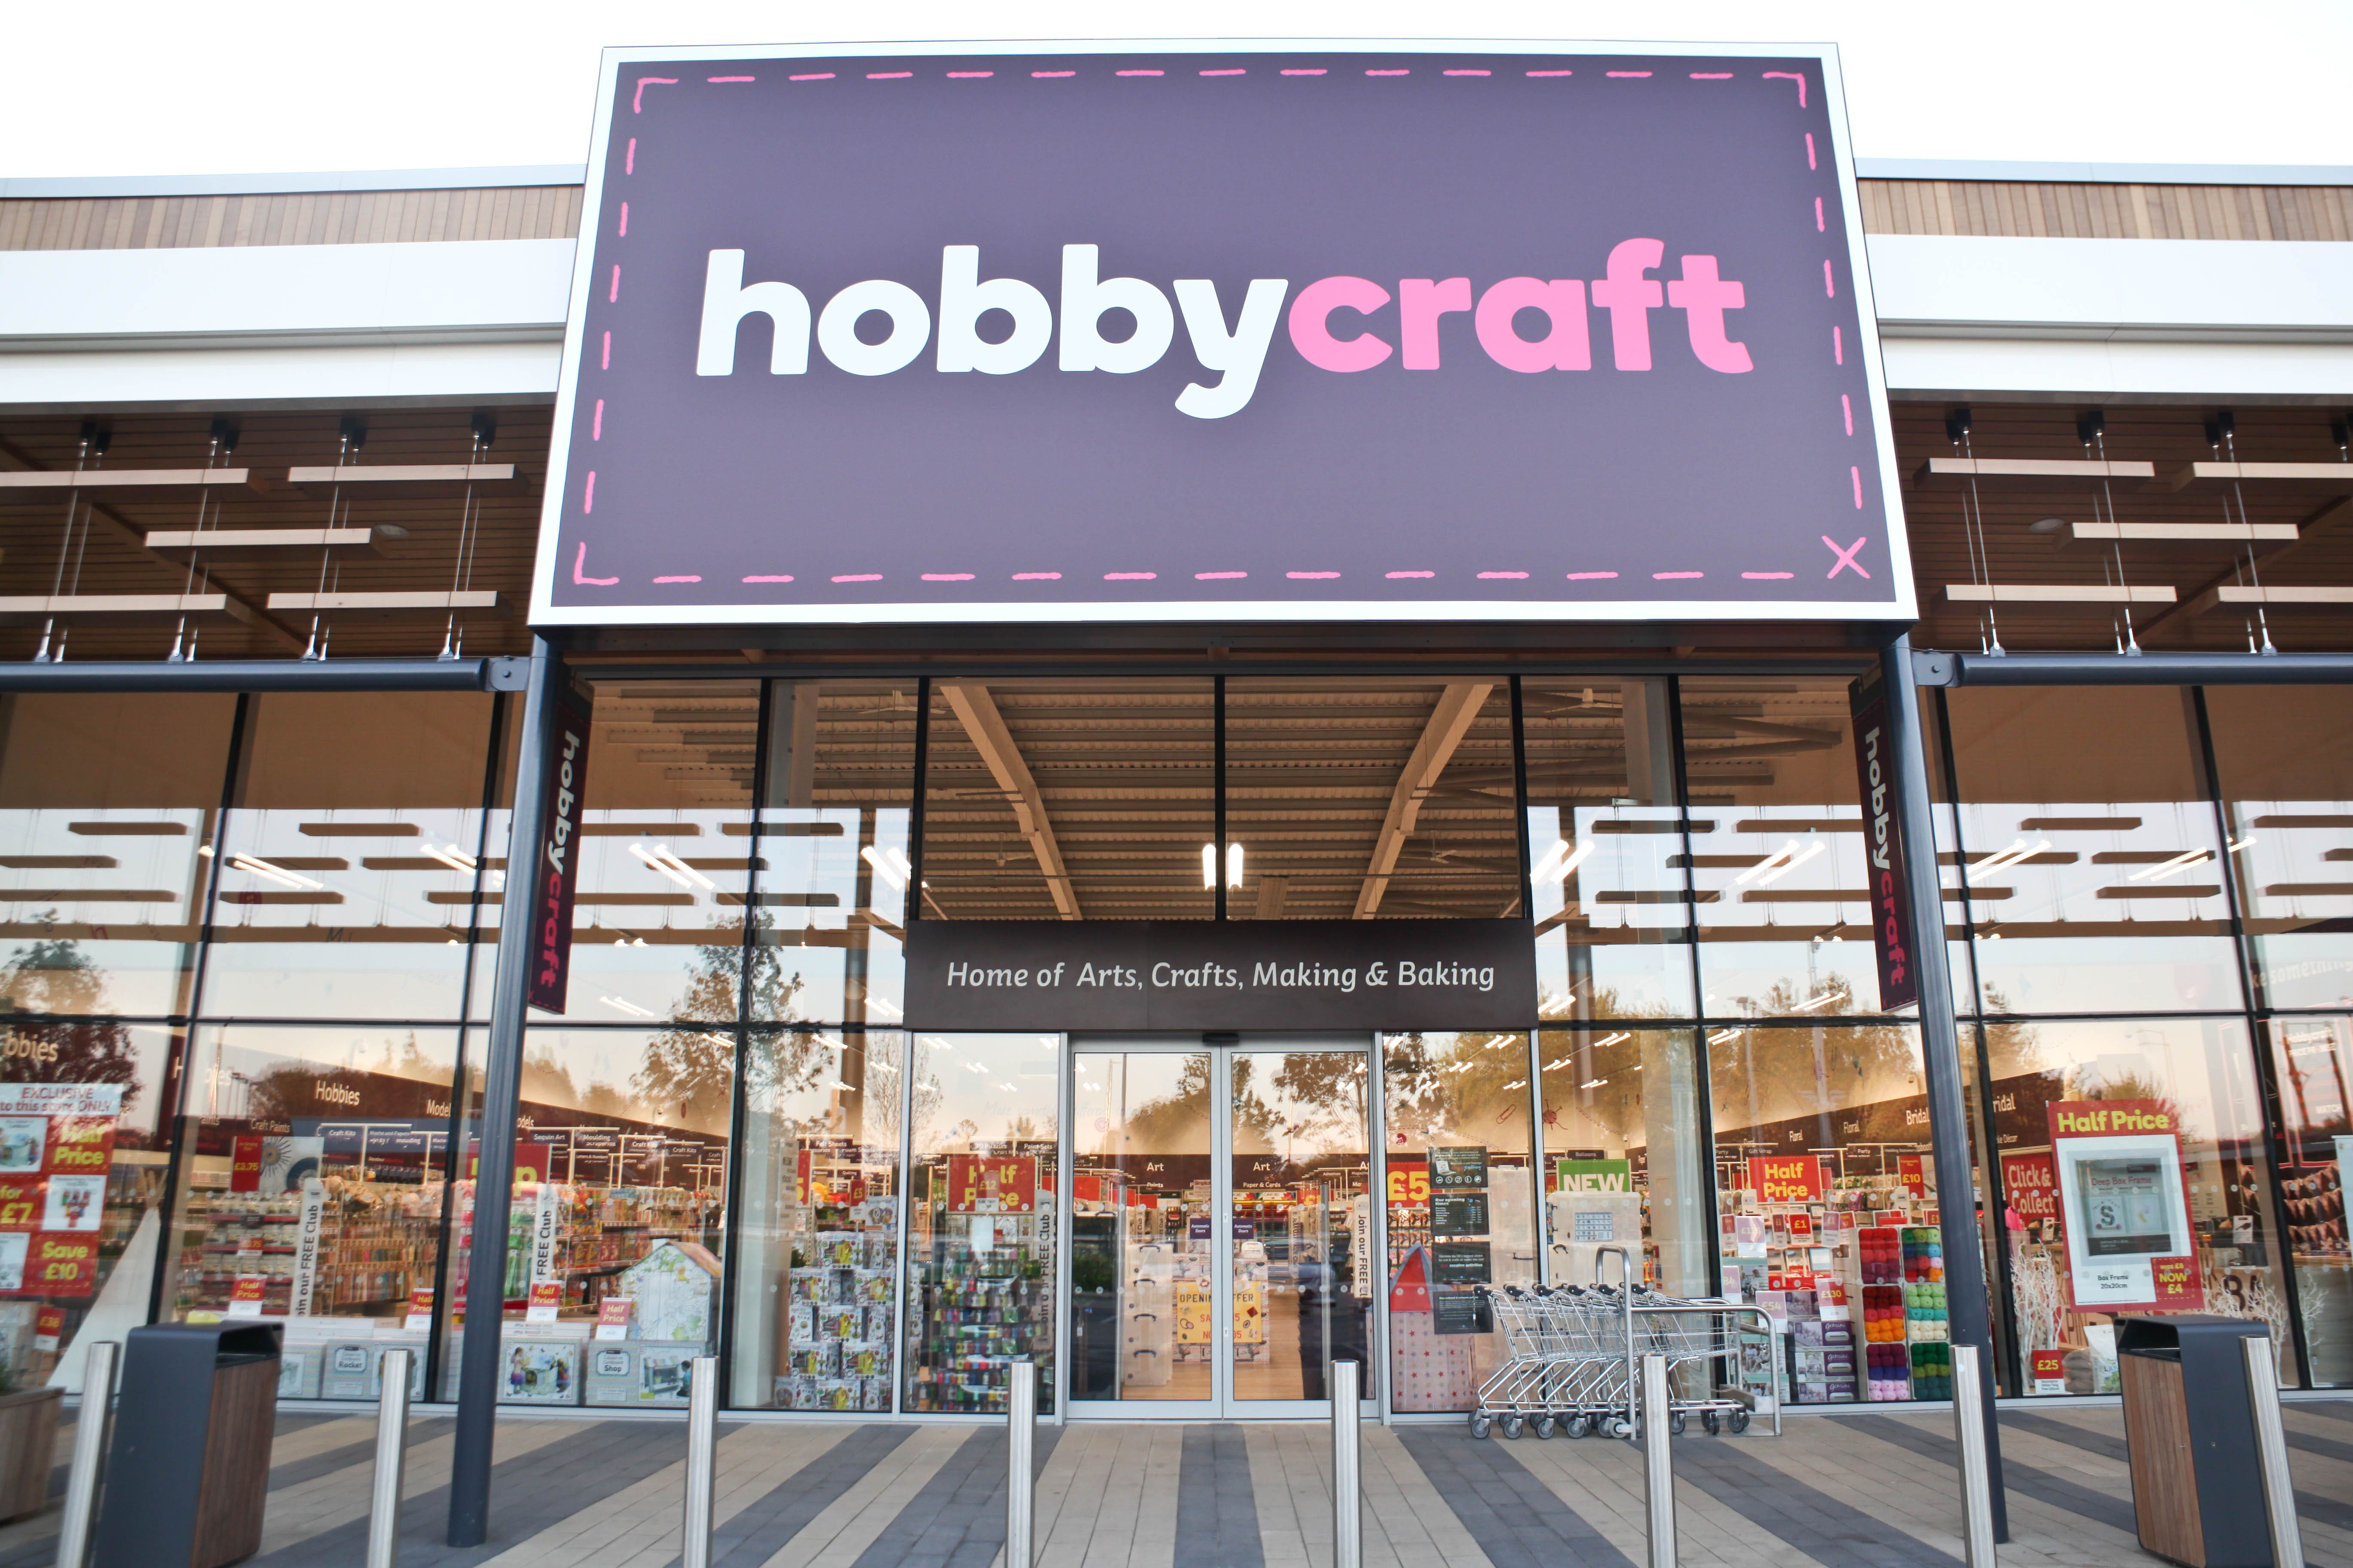 Hobbycraft said sales over the festive period grew by 7.2% year-on-year (Hobbycraft/PA)